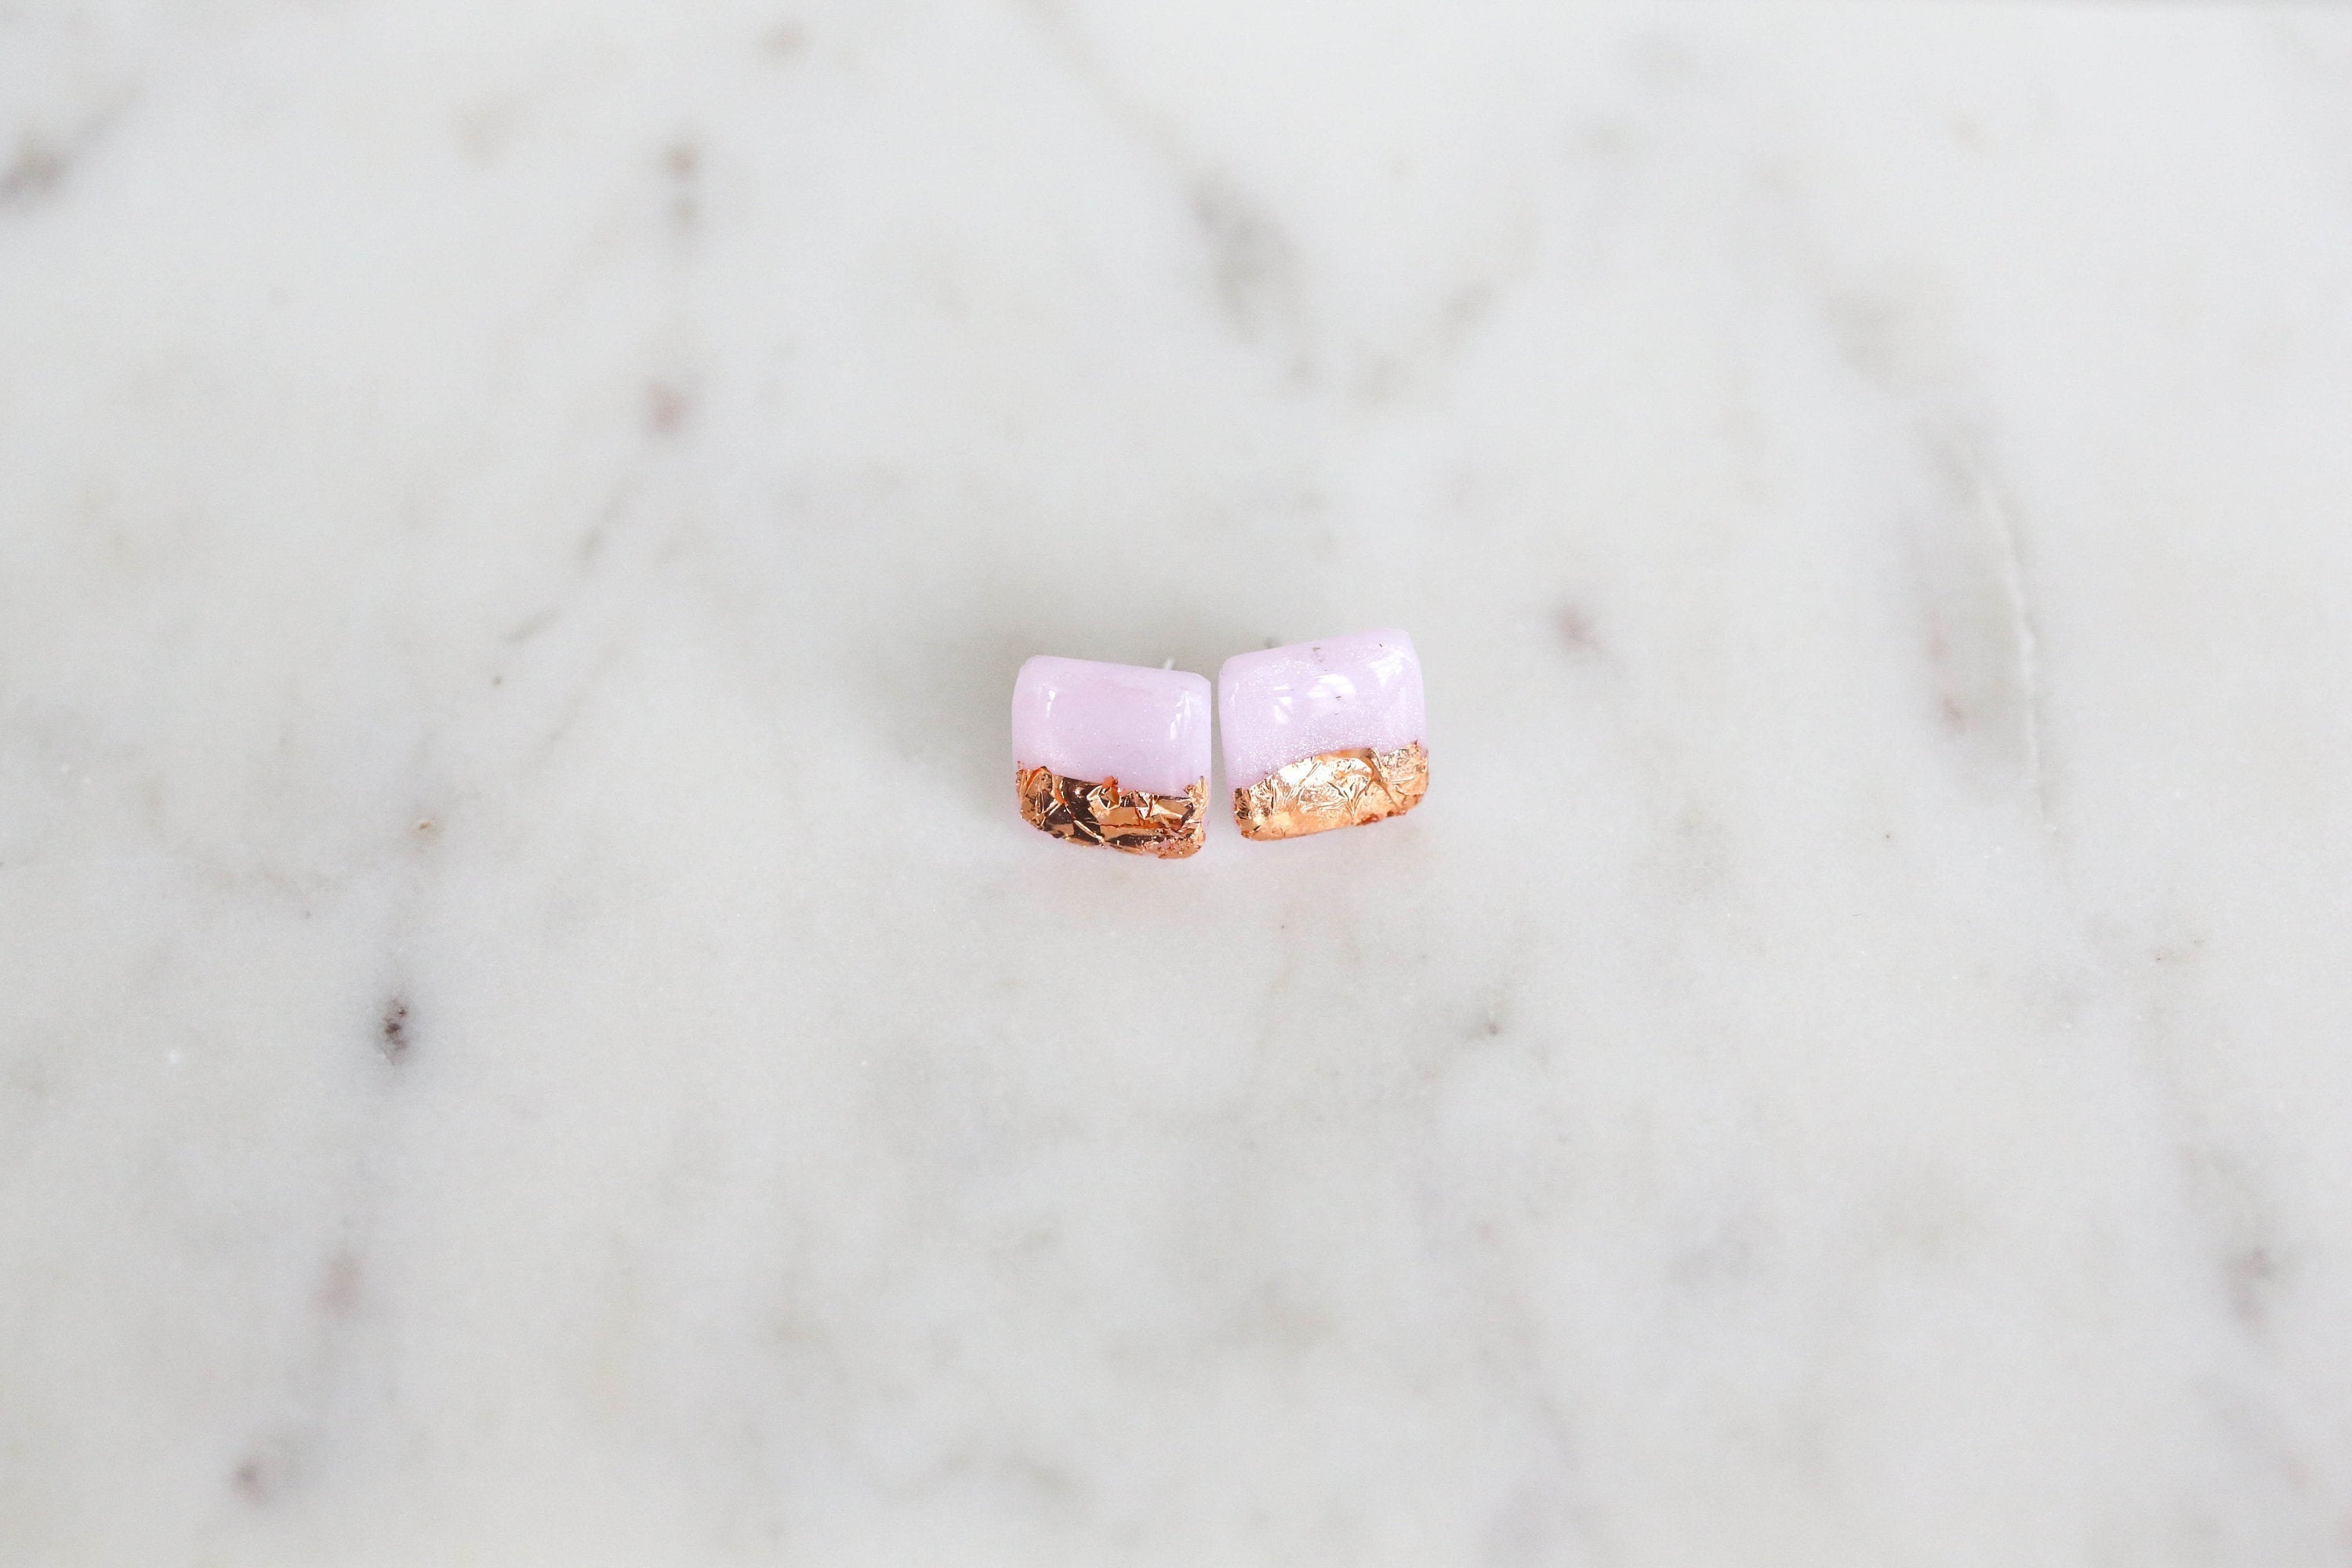 Surgical steel rose and gold square stud earrings freeshipping - Ollijewelry